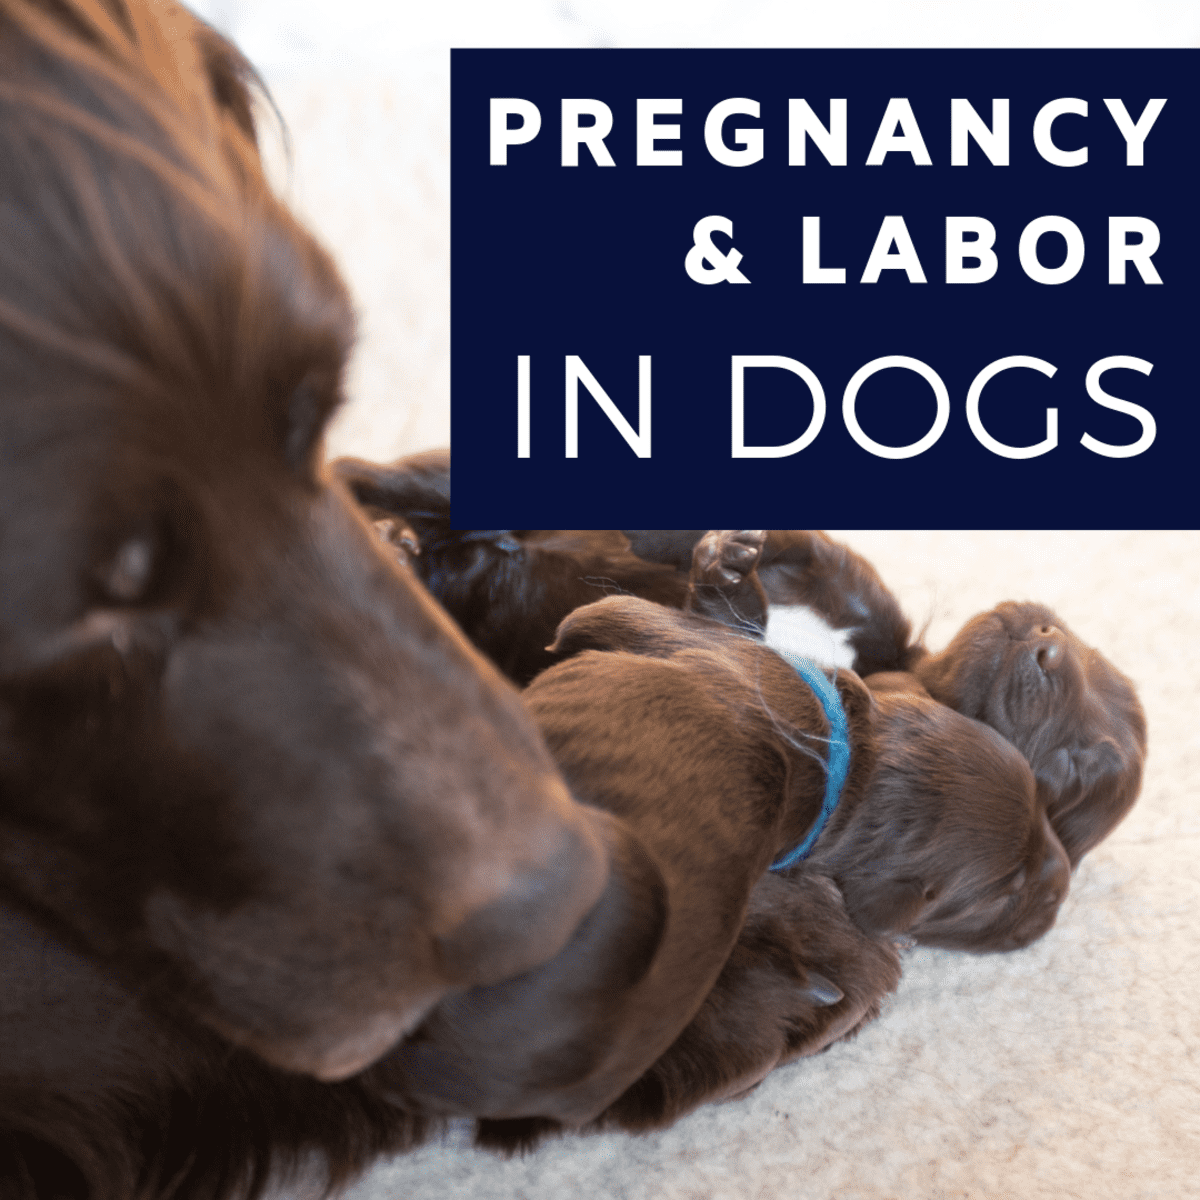 can a dog keep itself from going into labor